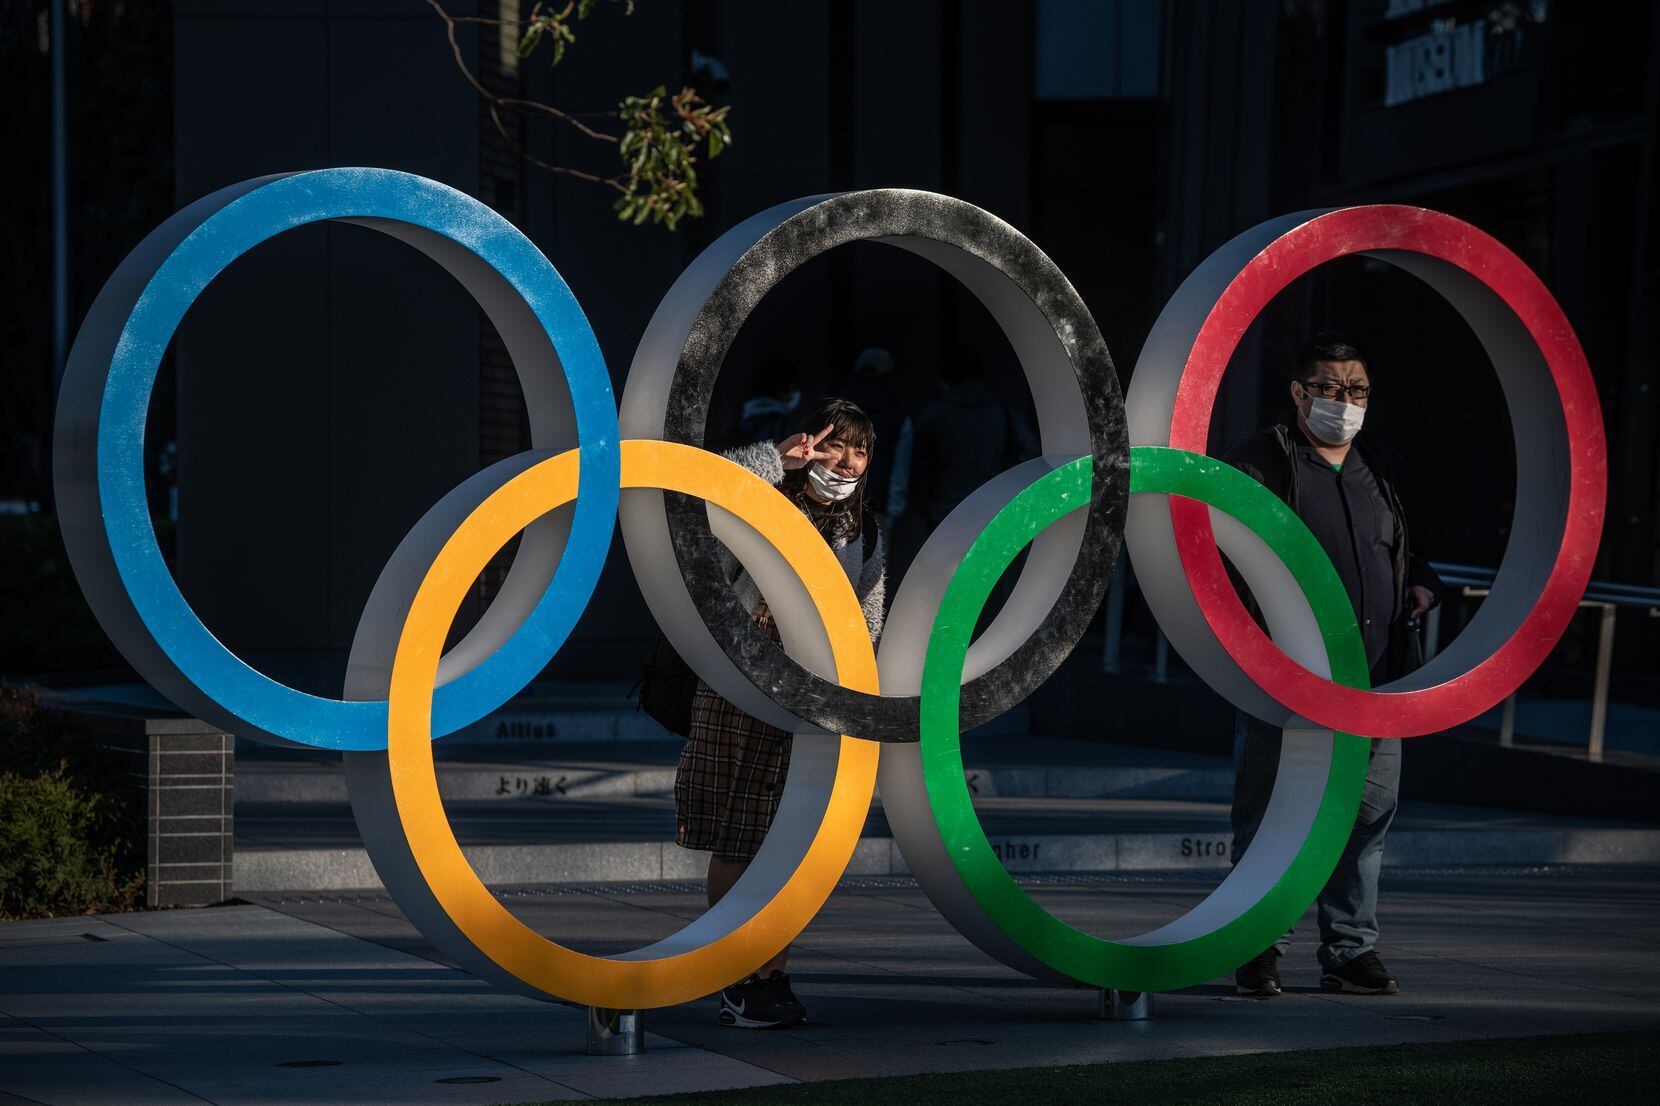 People wearing face masks pose for photographs next to Olympic Rings on March 24, 2020 in...